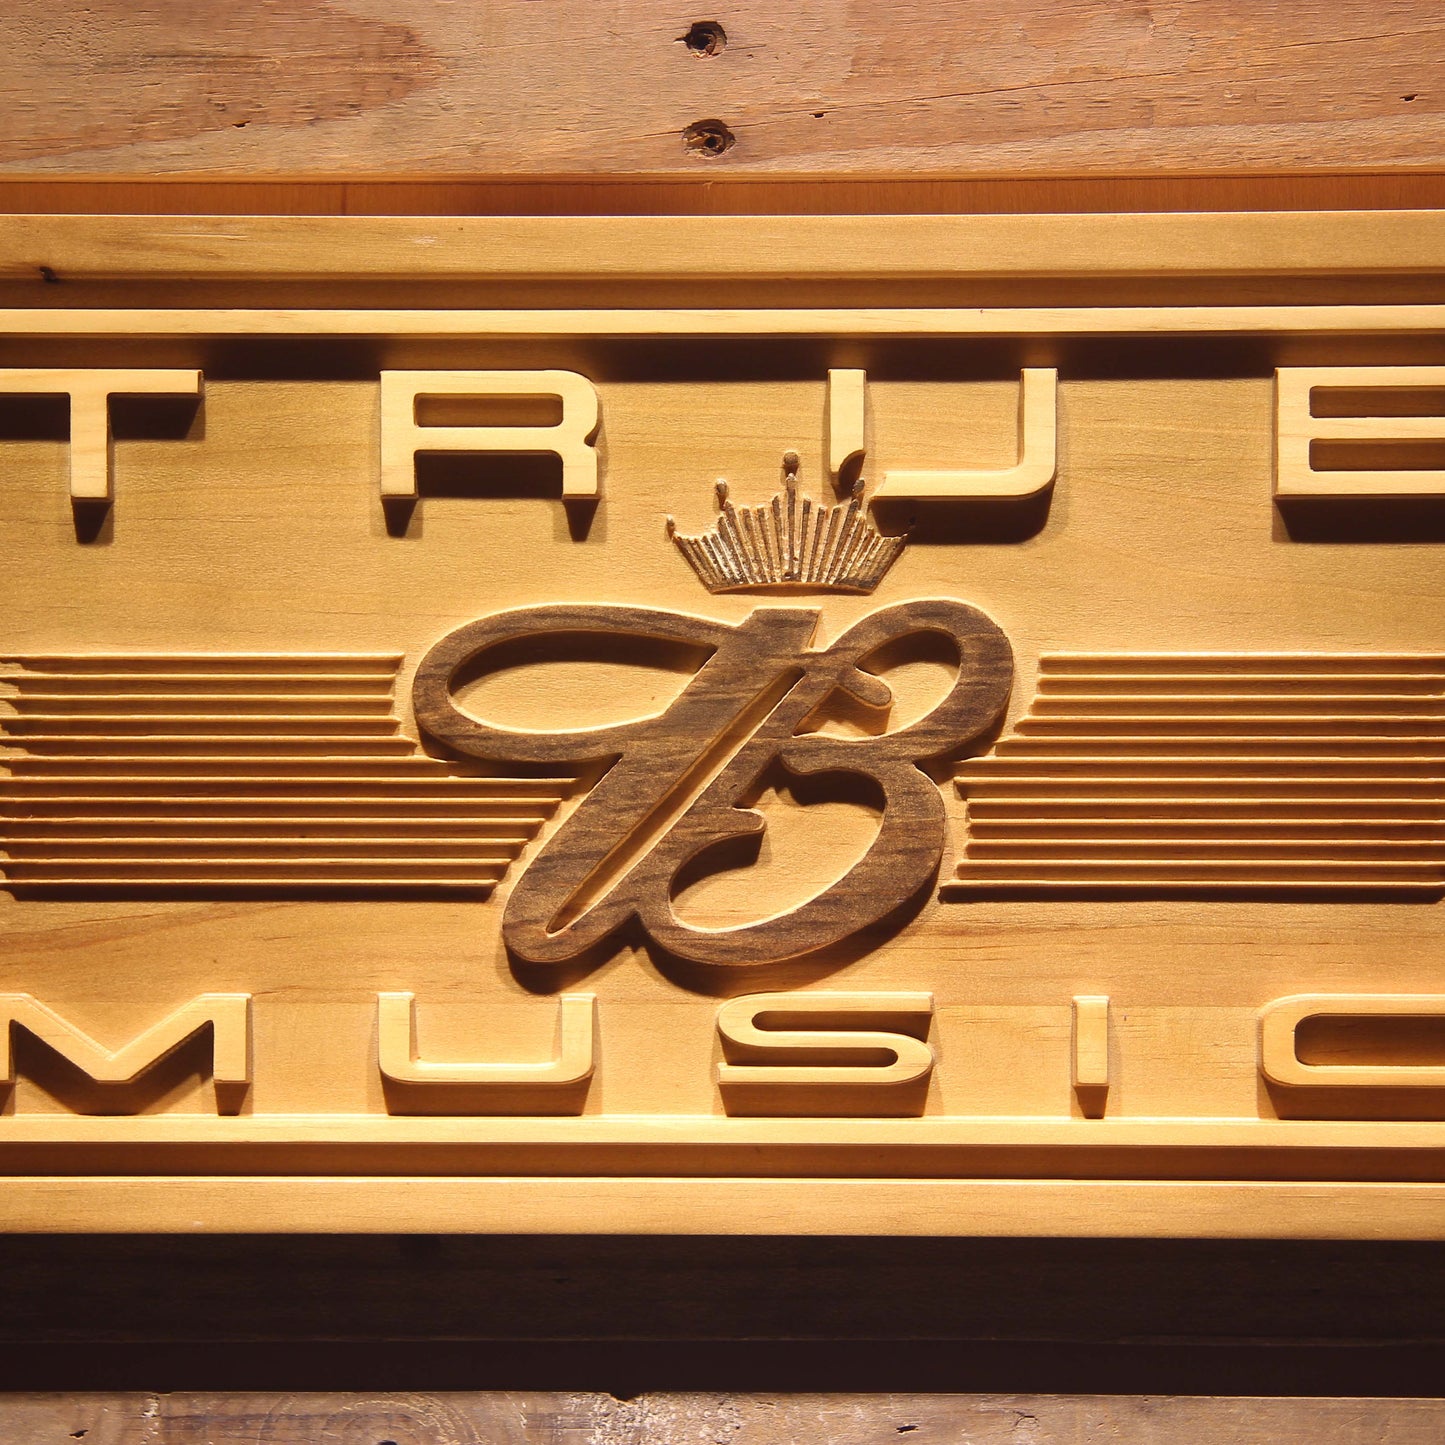 Budweiser True Music  3D Wooden Bar Signs by Woody Signs Co. - Handmade Crafted Unique Wooden Creative